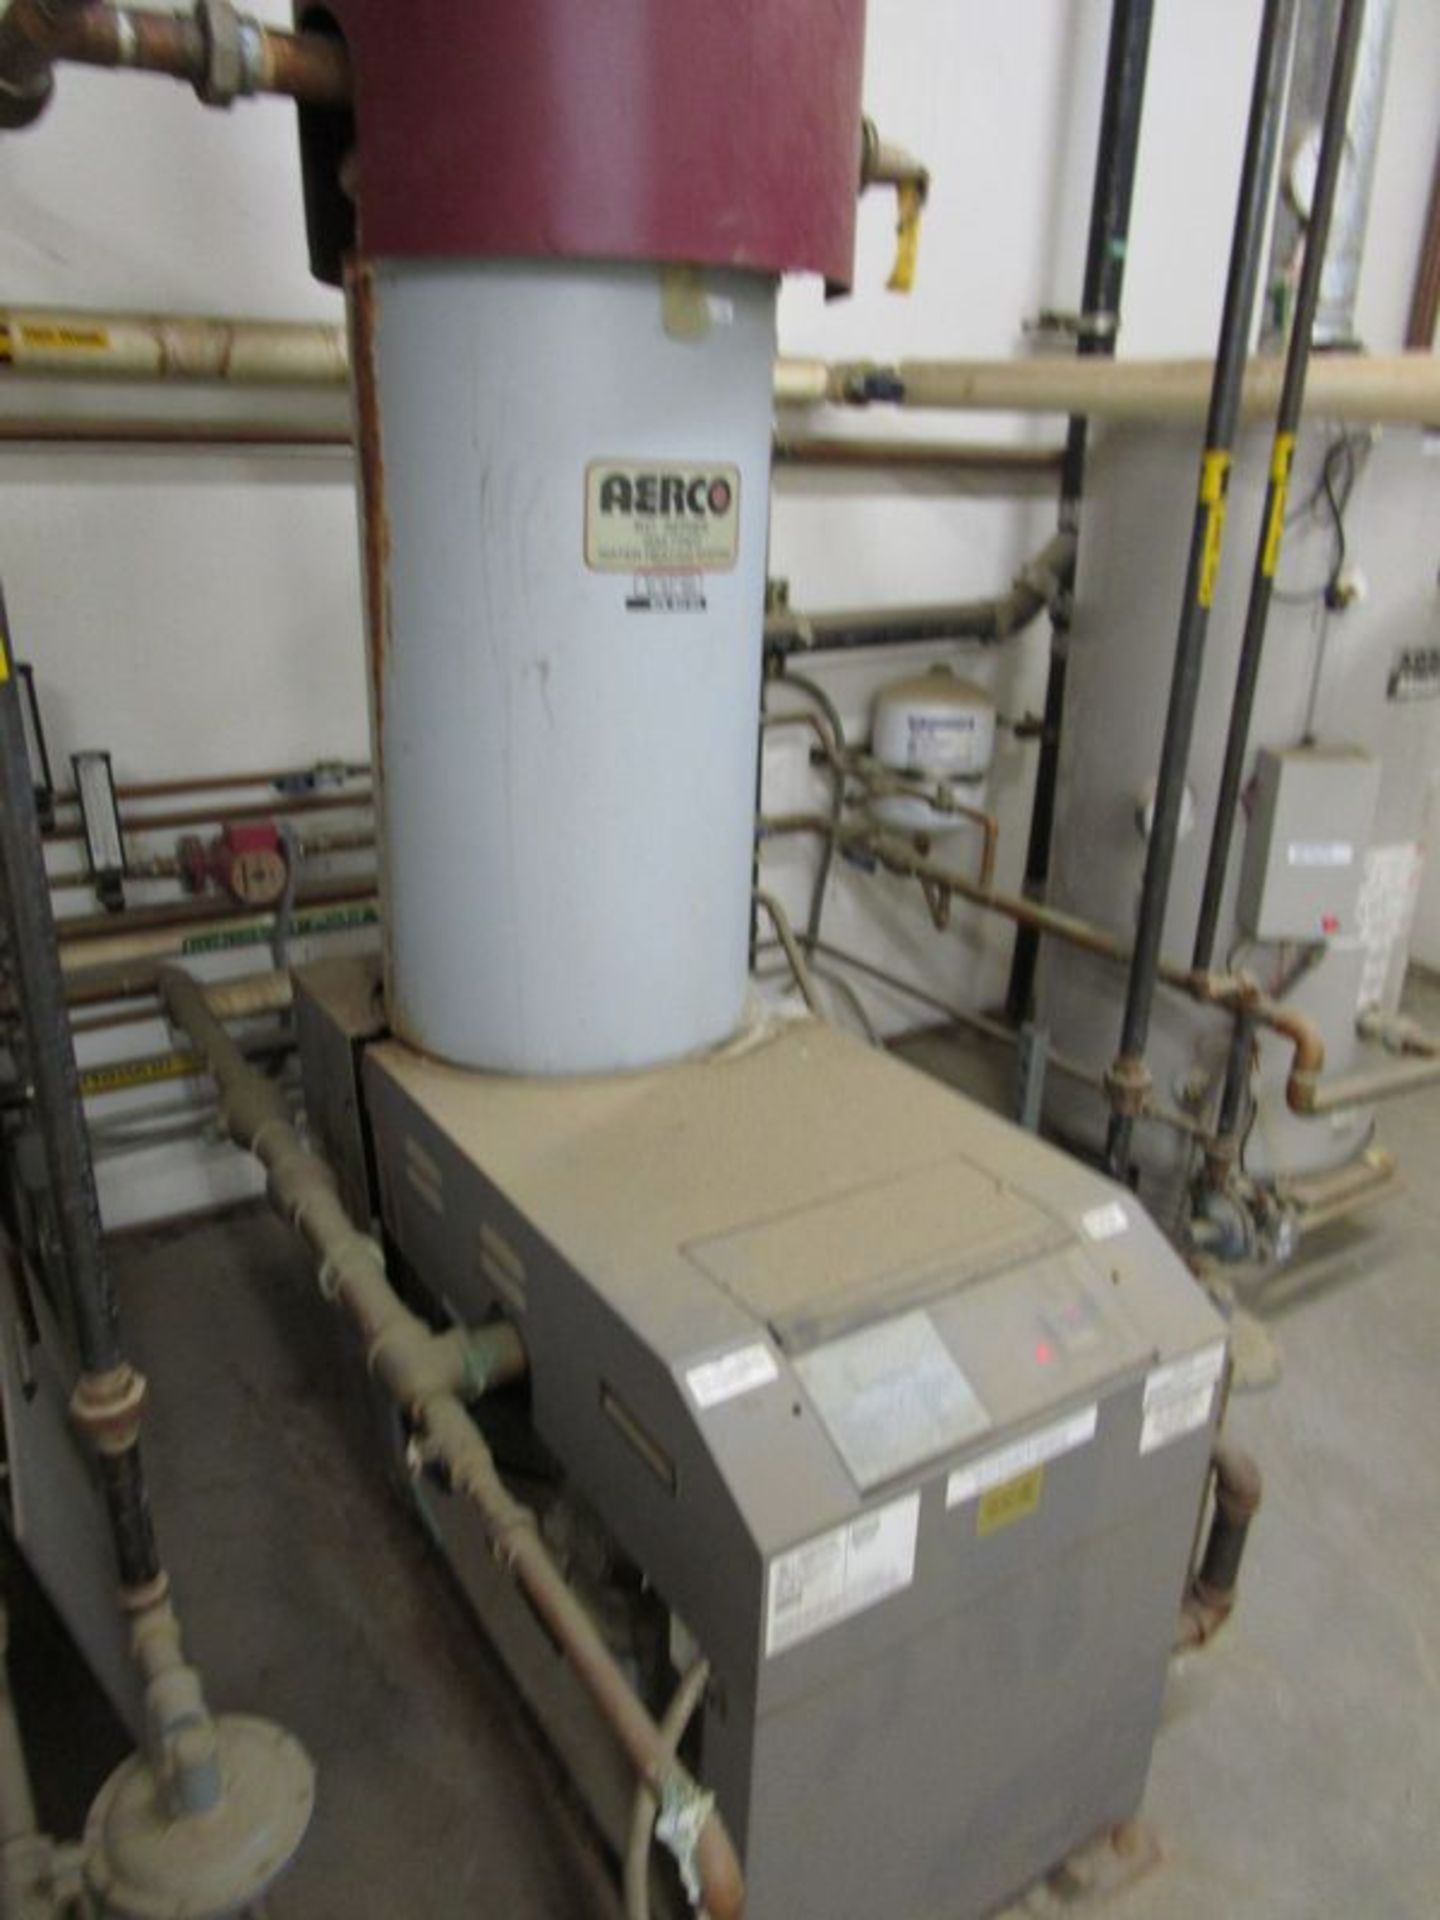 Aerco Model KC Series  Hot Water Boiler , Serial Number: G-97-032  (1997)Gas Fired Water Heater, - Image 6 of 6